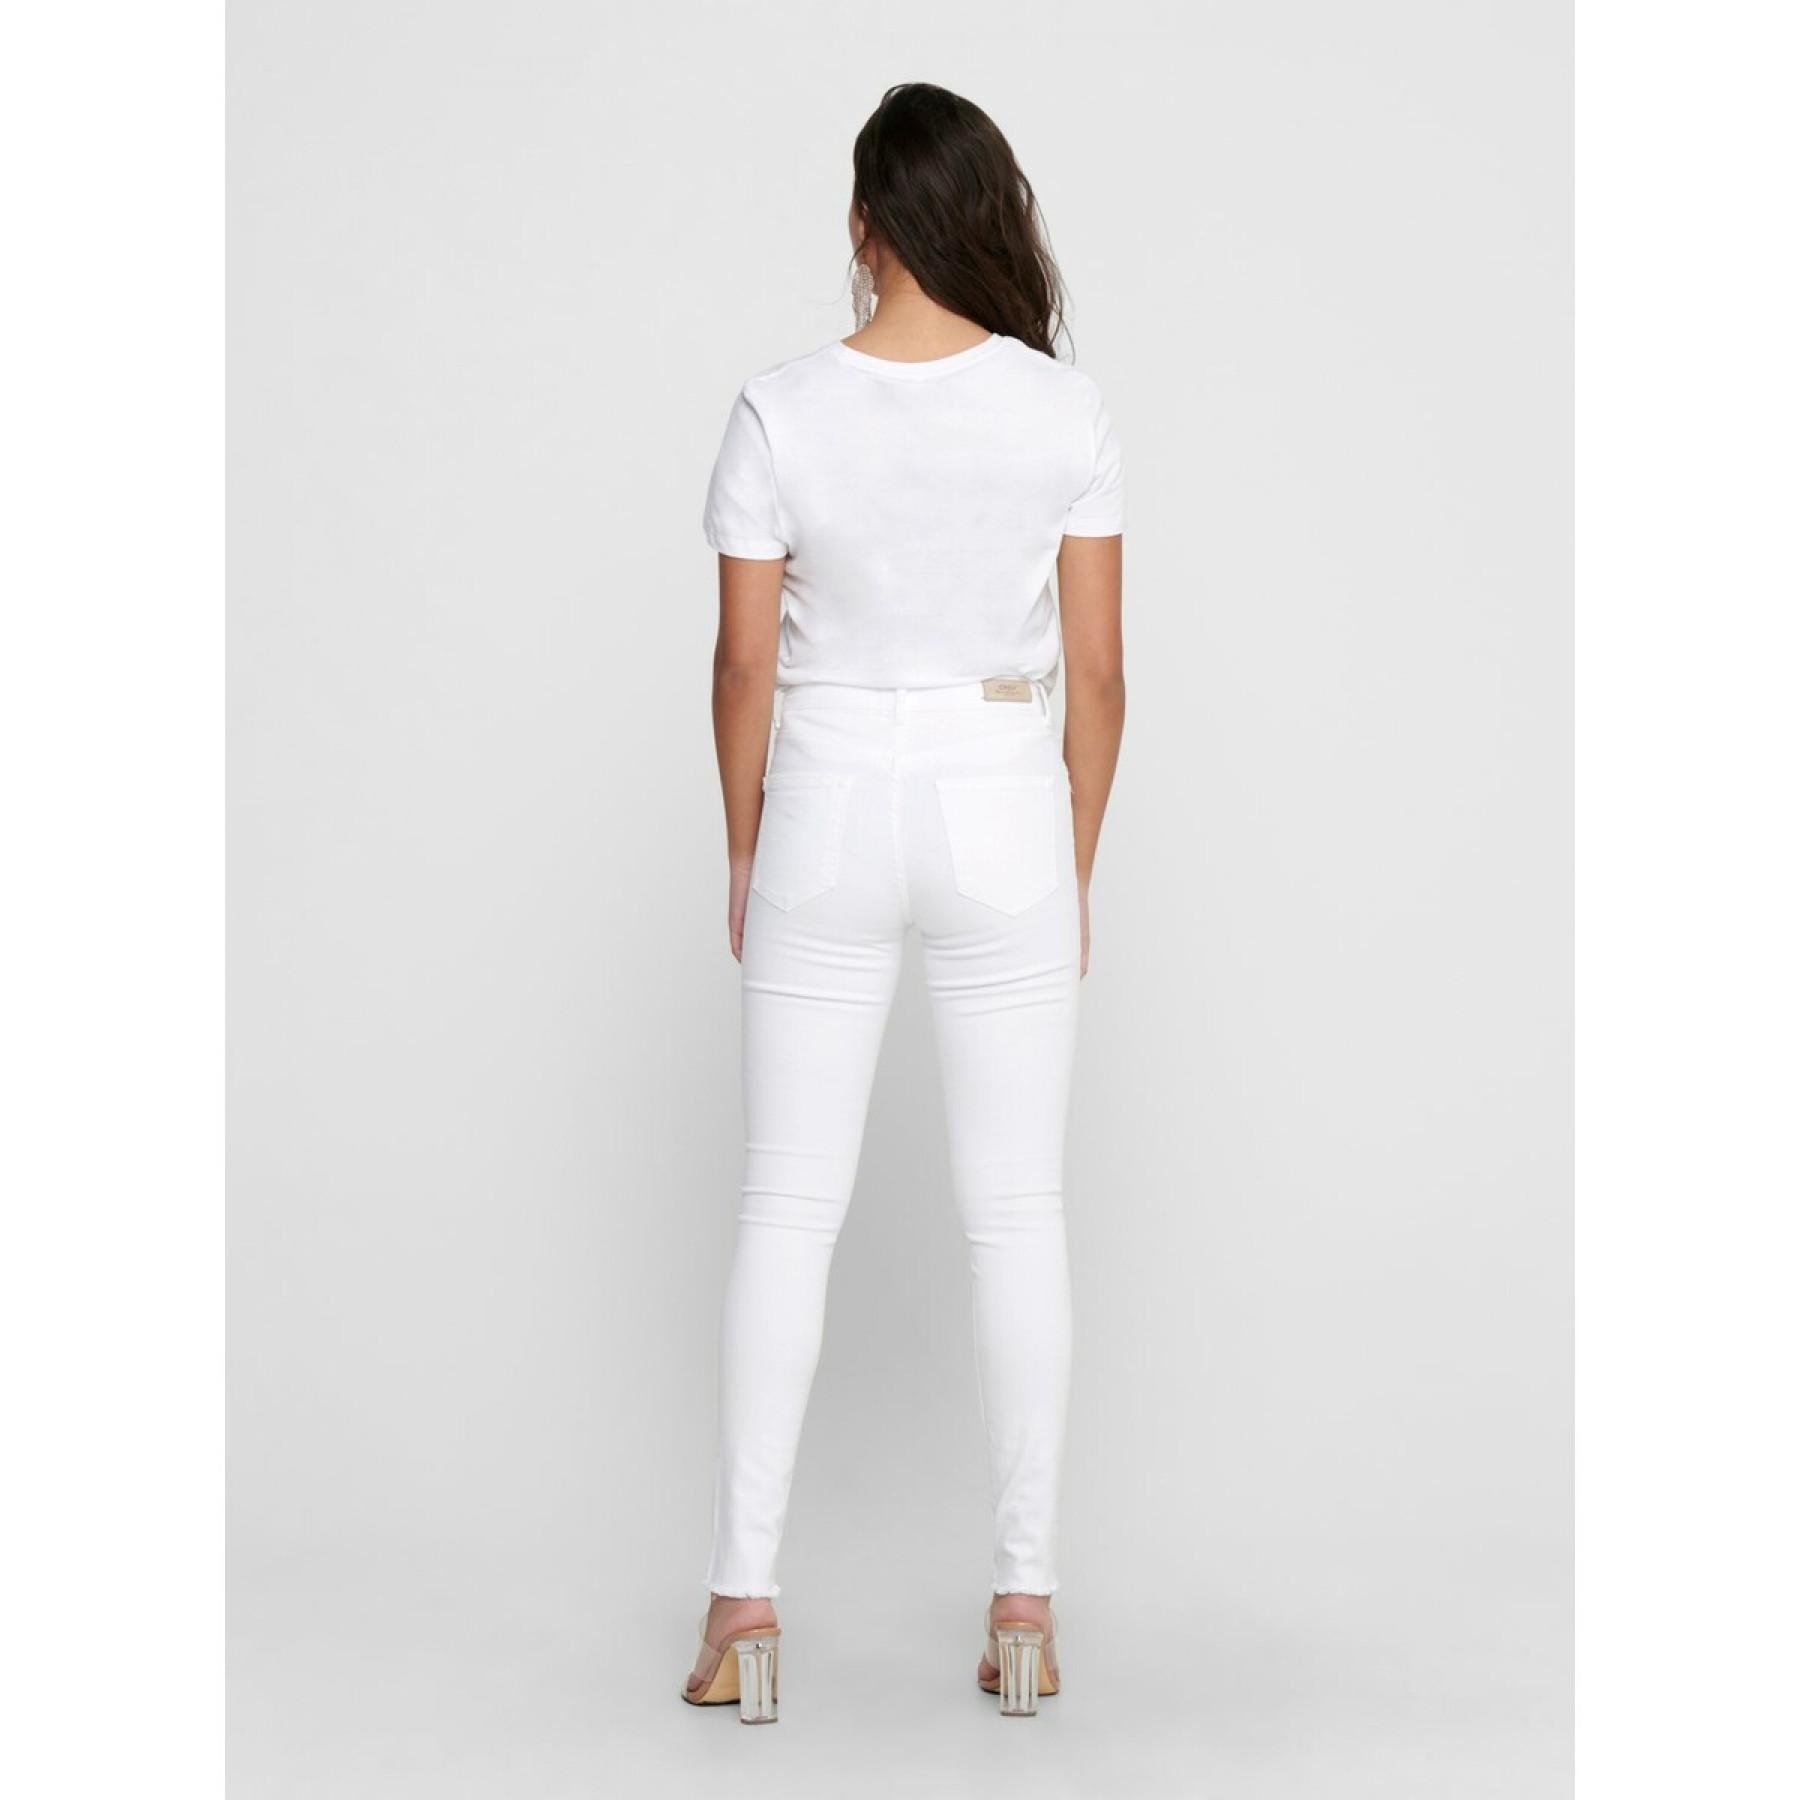 Women's trousers Only Blush life